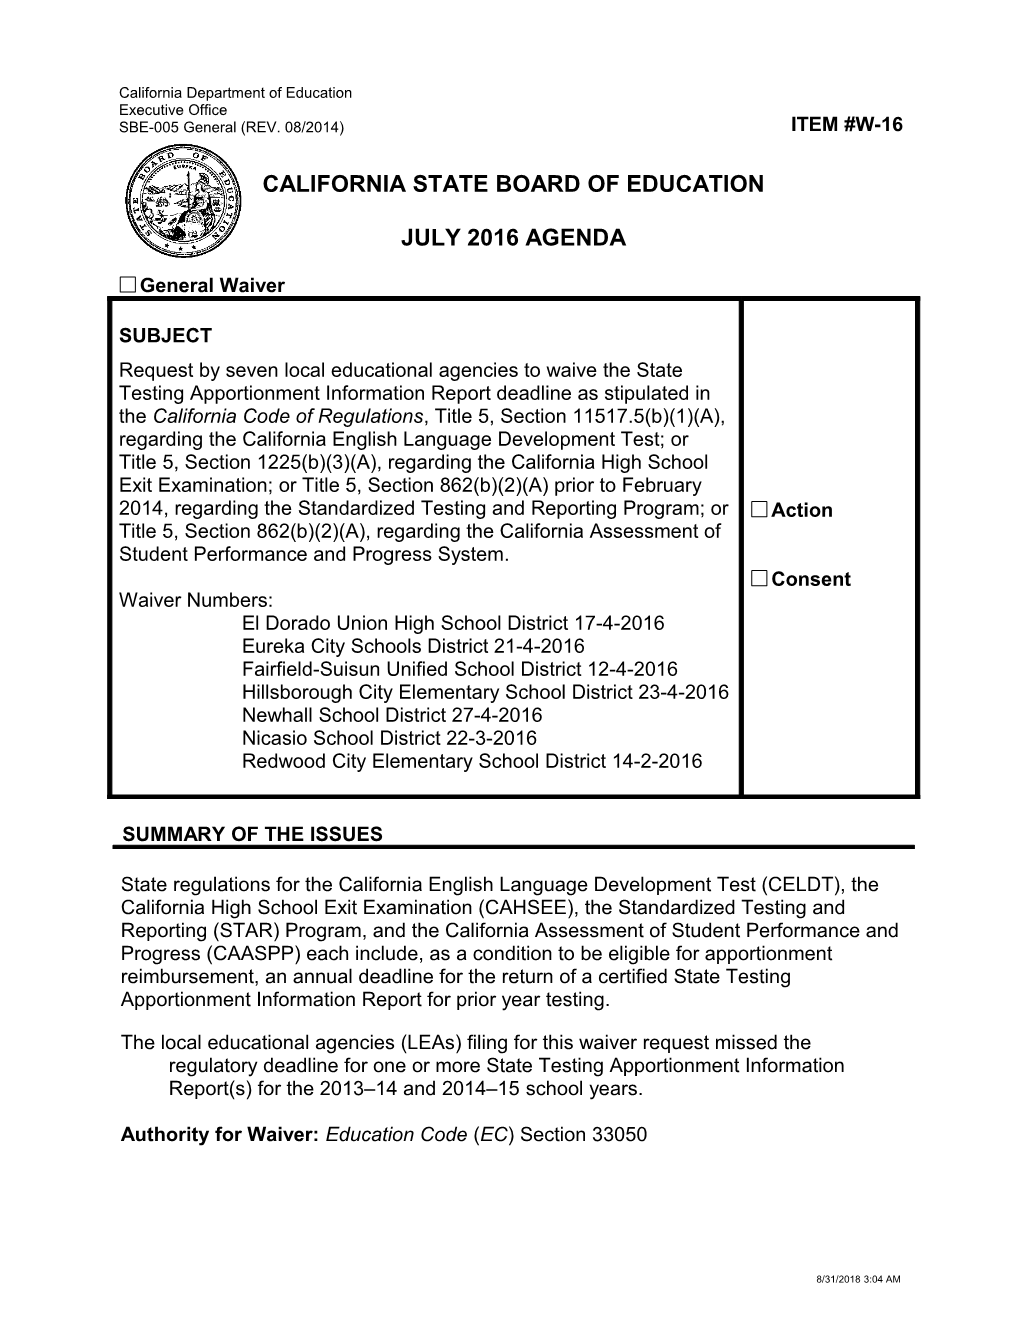 July 2016 Waiver Item W-16 - Meeting Agendas (CA State Board of Education)